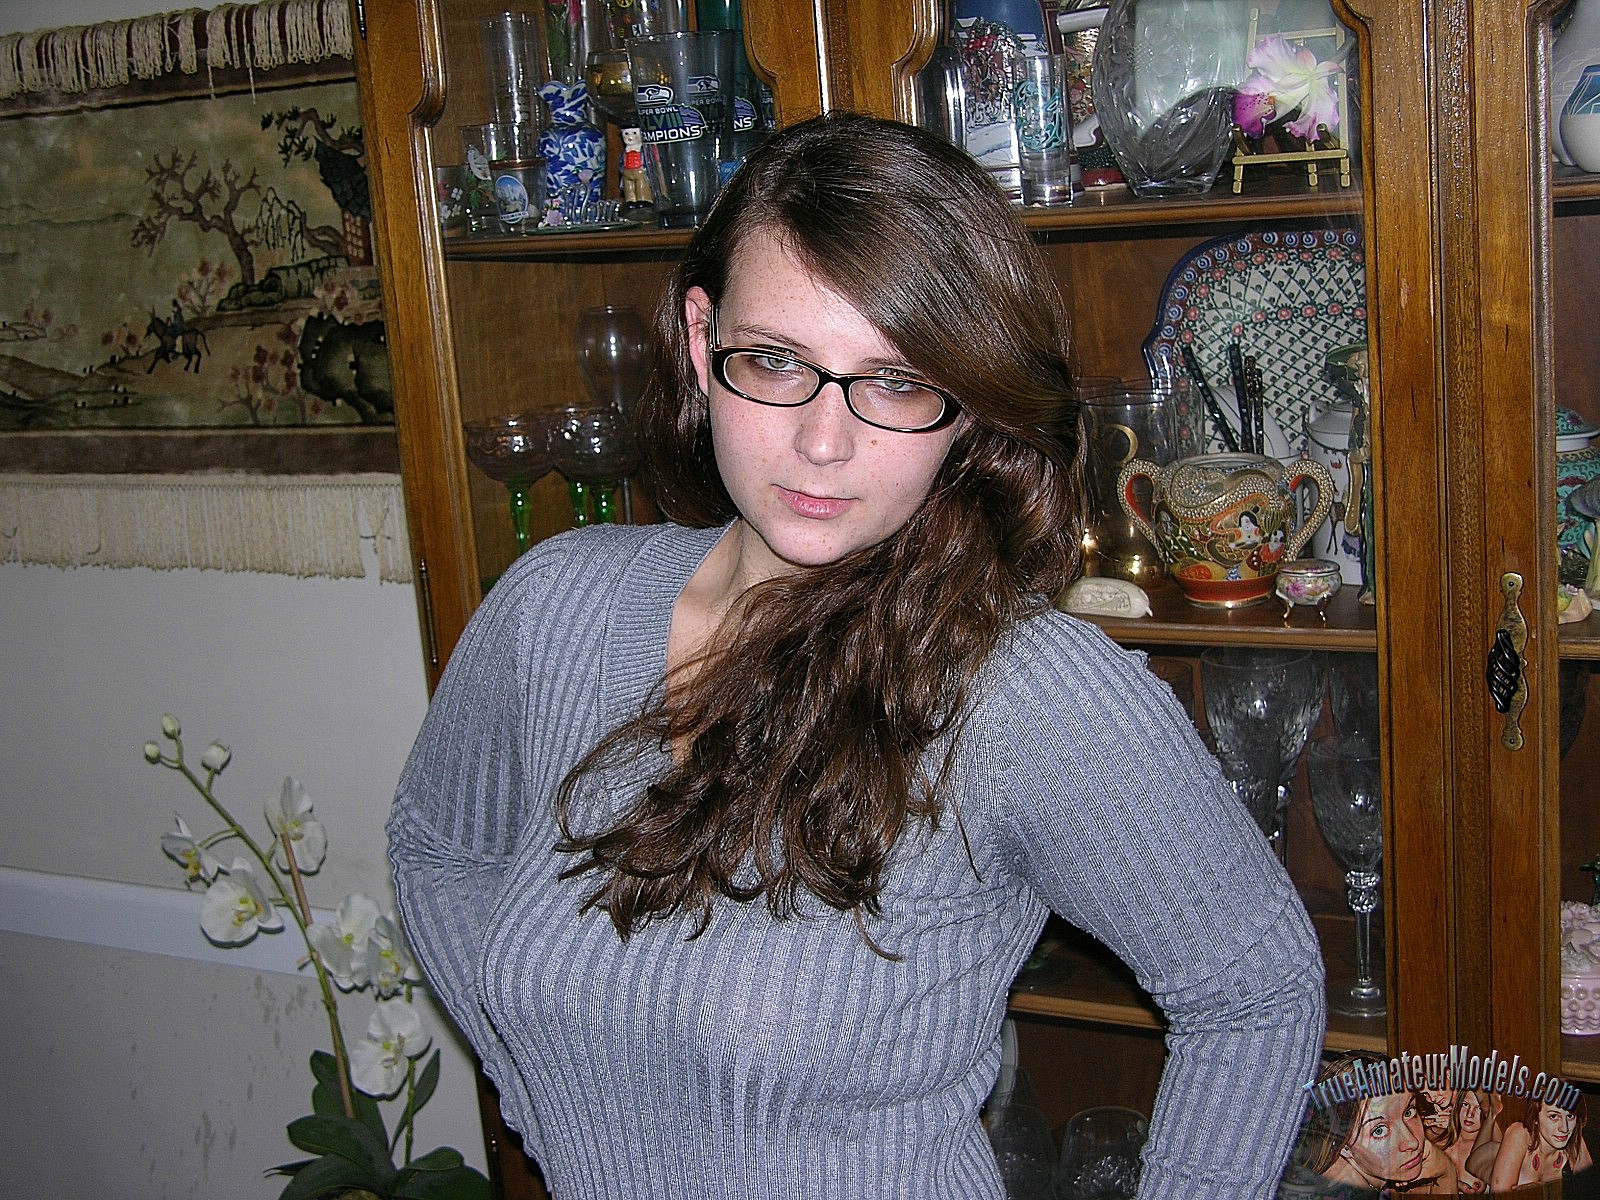 Nerdy amateur teen Skyye wearing glasses gets undressed and spreads her pussy image